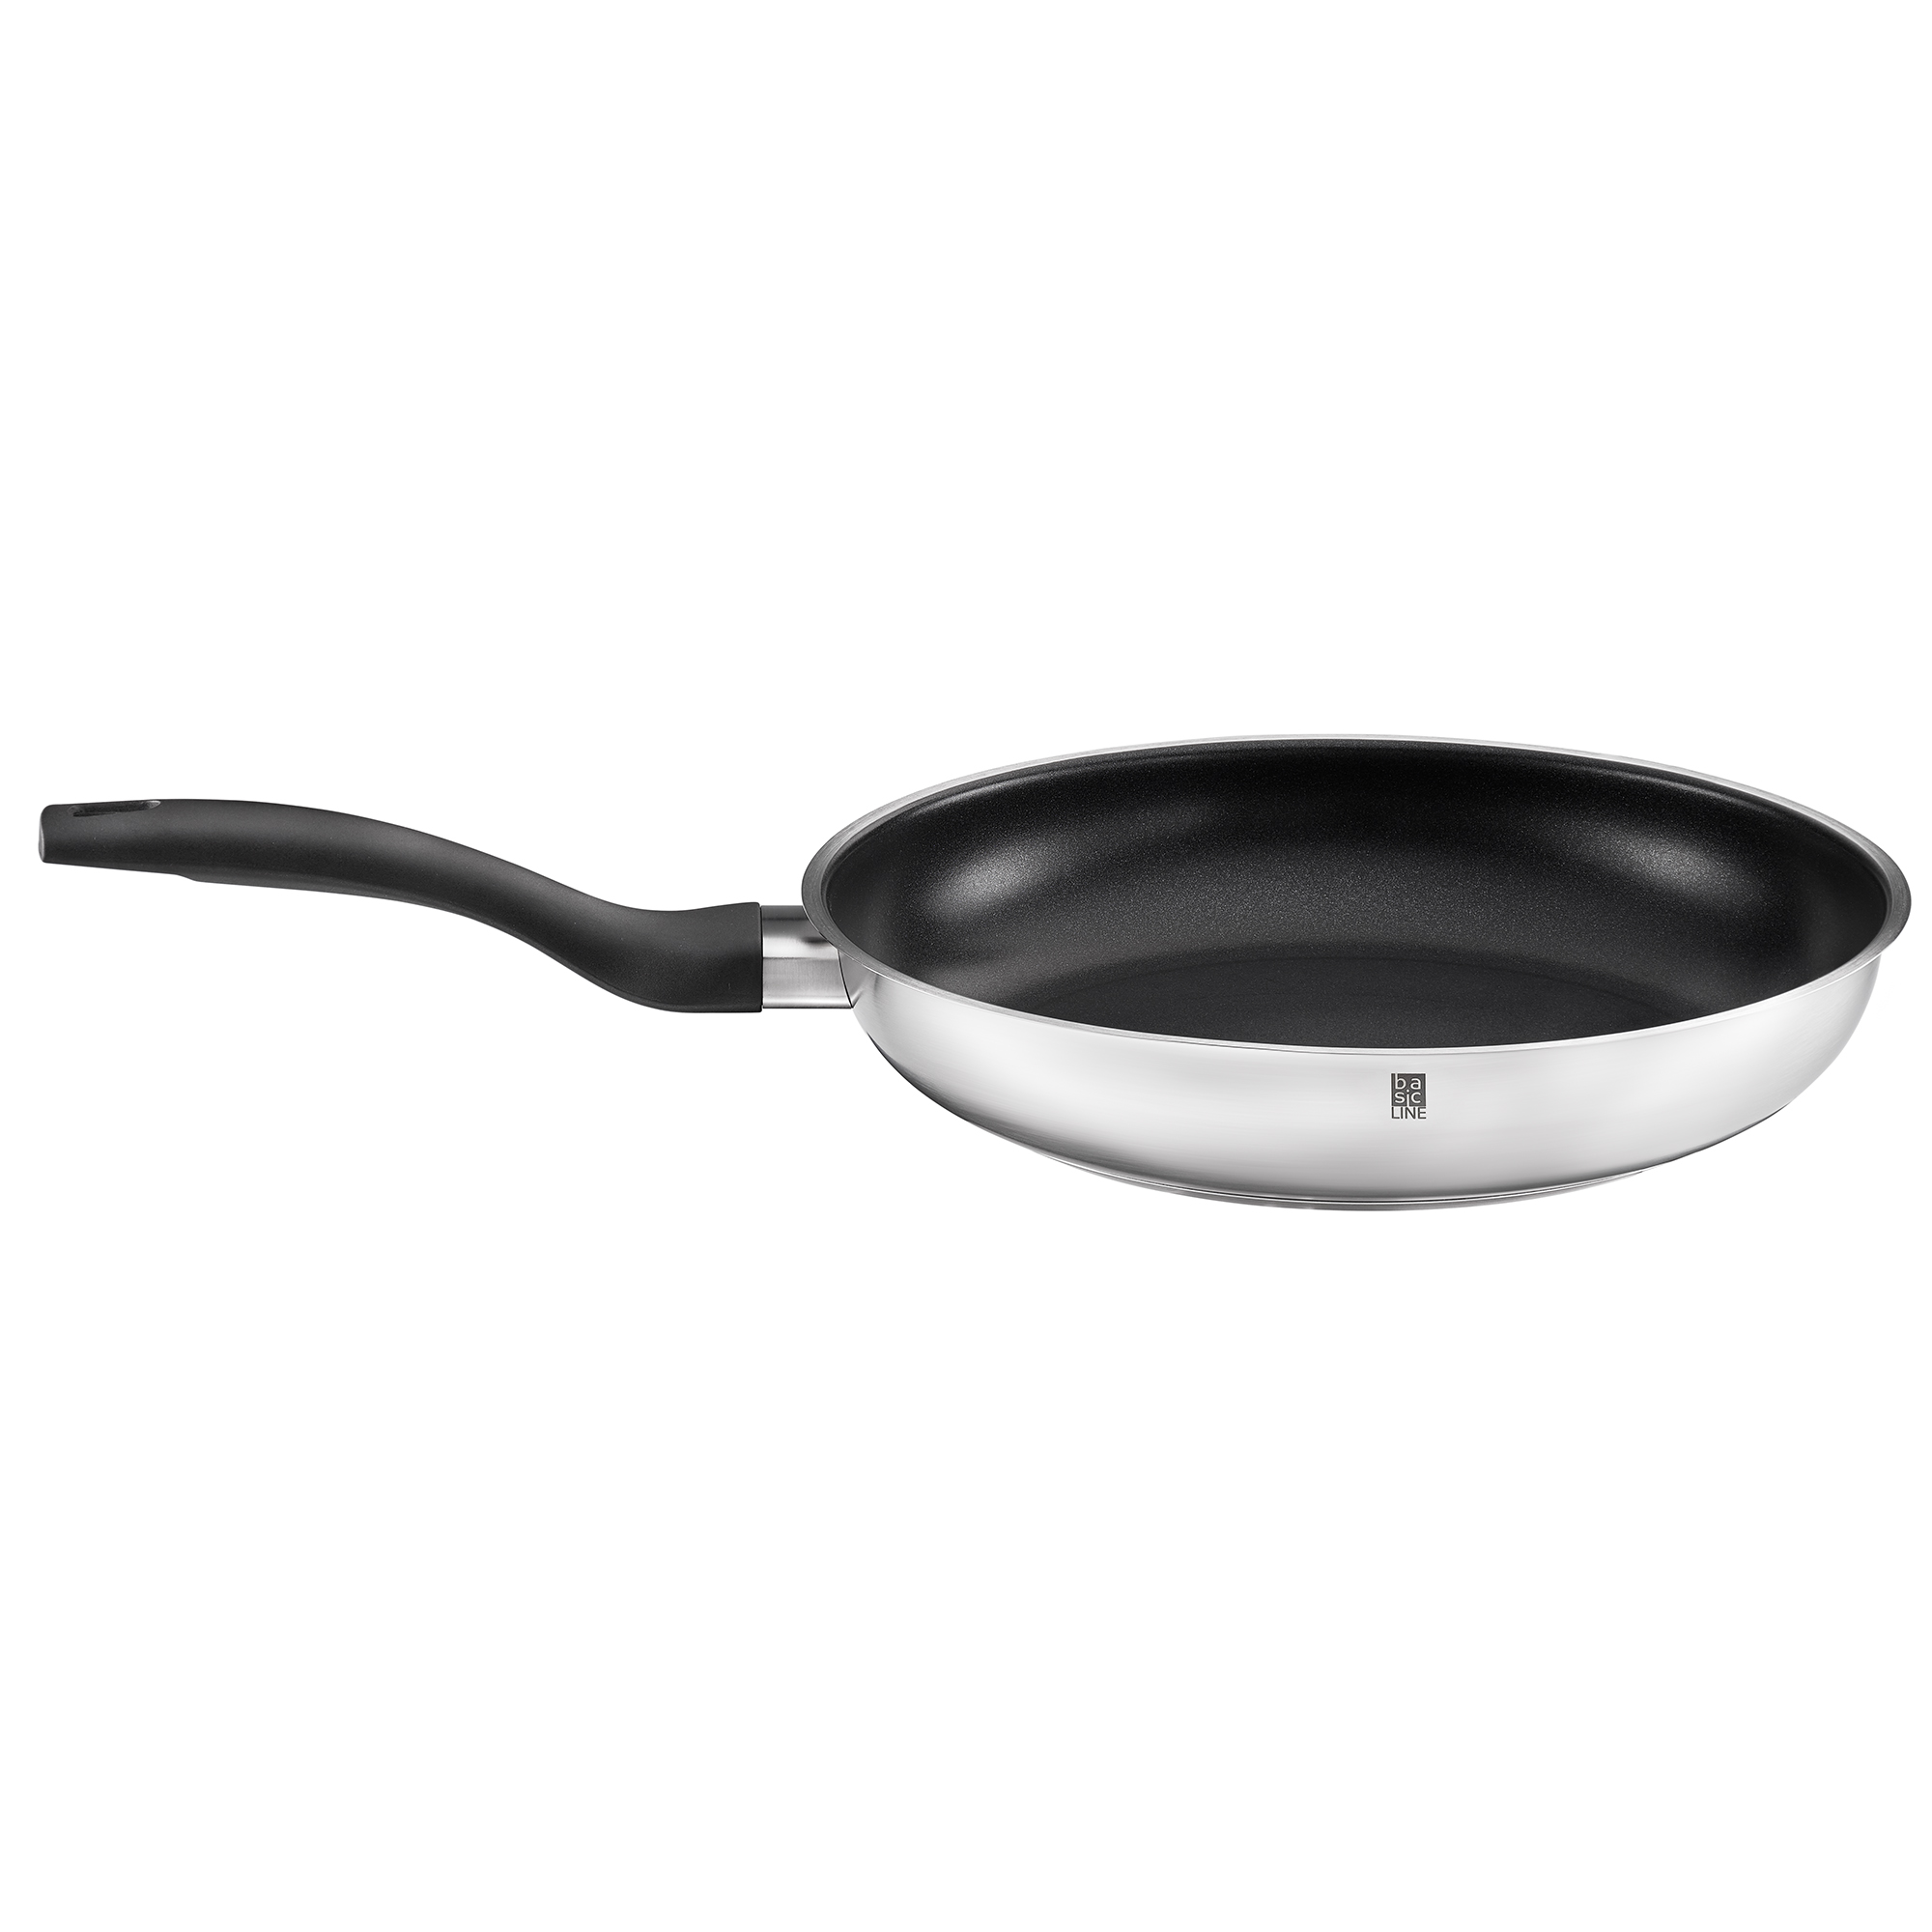 Frying pan "Basic Line" Ø 28 cm I 11.0 in. with non-stick coating ProPlex